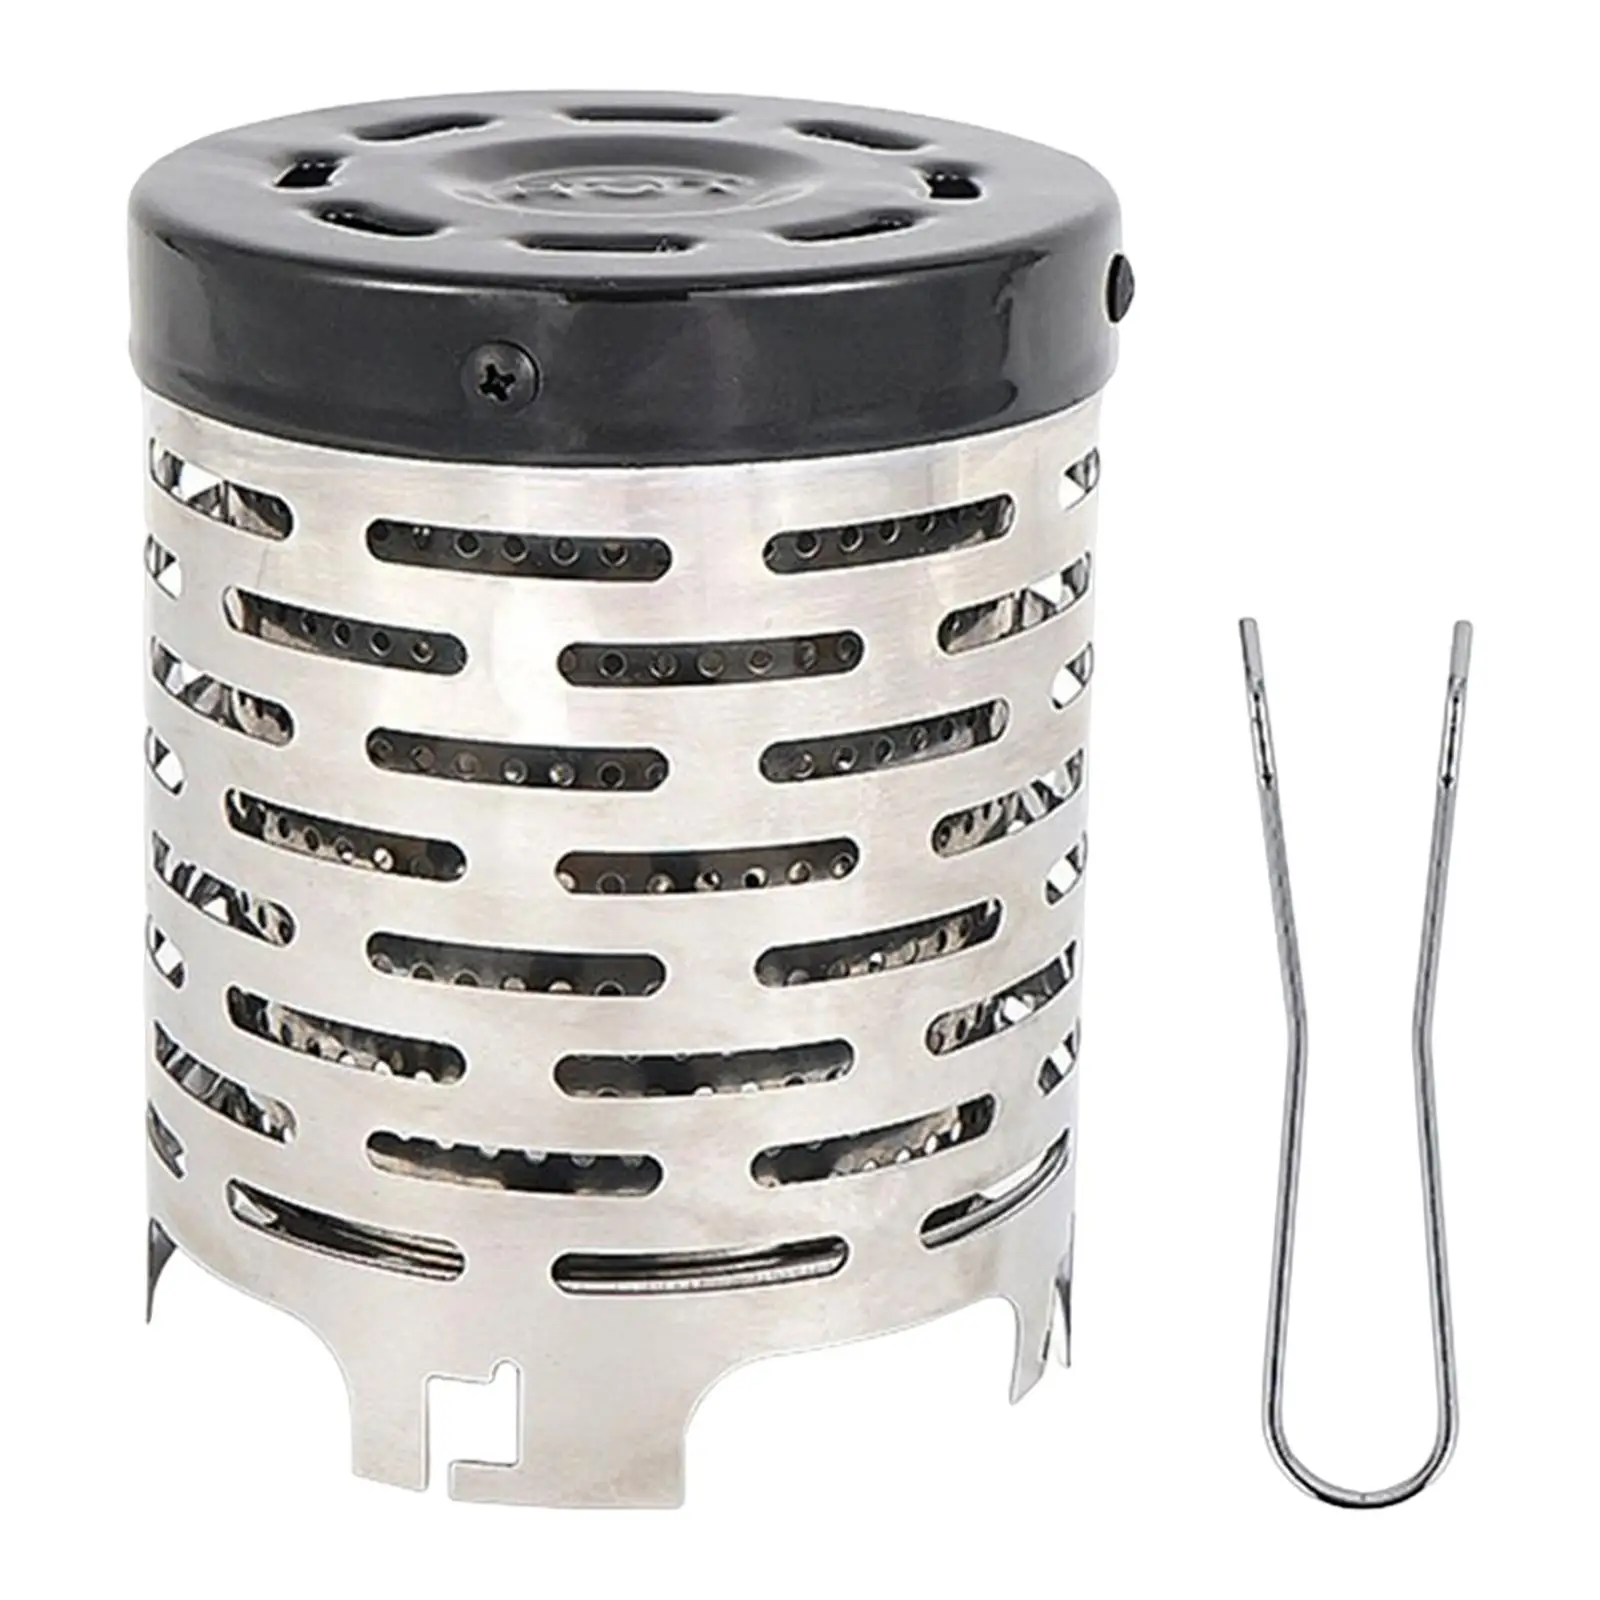 Outdoor Camping Mini Heater Stove Tent Heating Stove for Backpacking BBQ